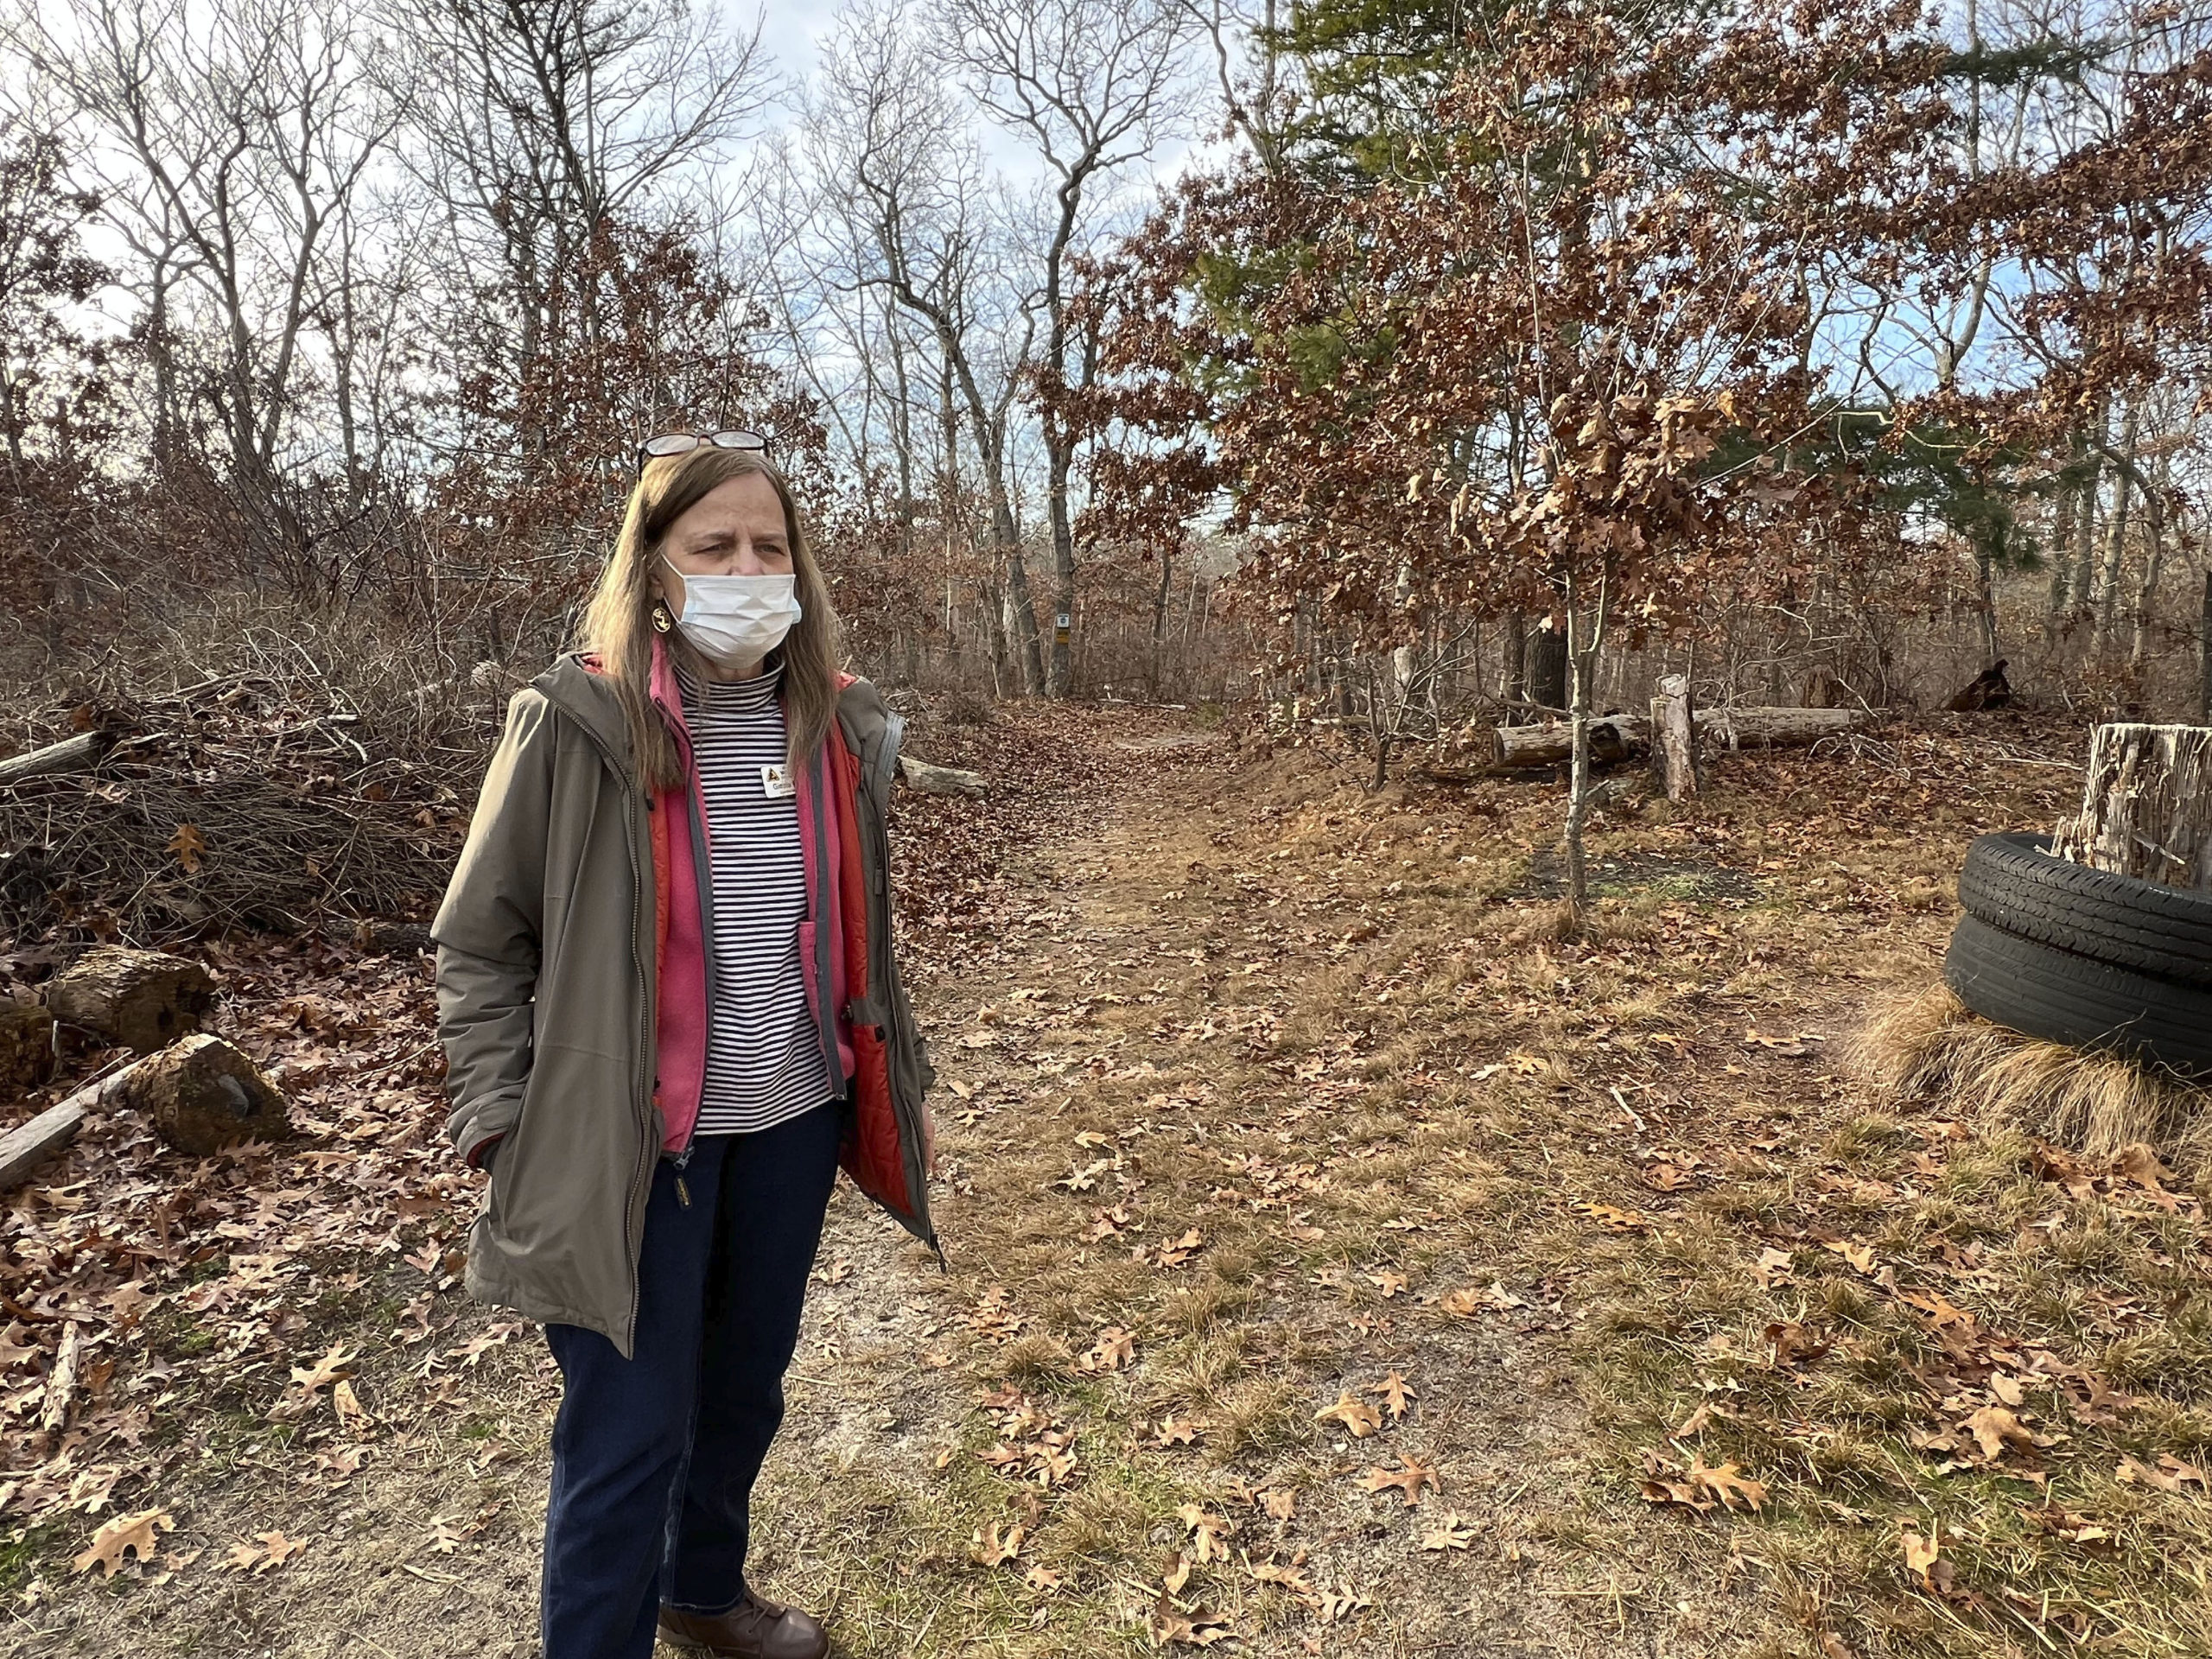 Evelyn Alexander Wildlife Rescue Center Executive Director Ginnie Frati near the area where she discovered the fatally wounded deer.  DANA SHAW